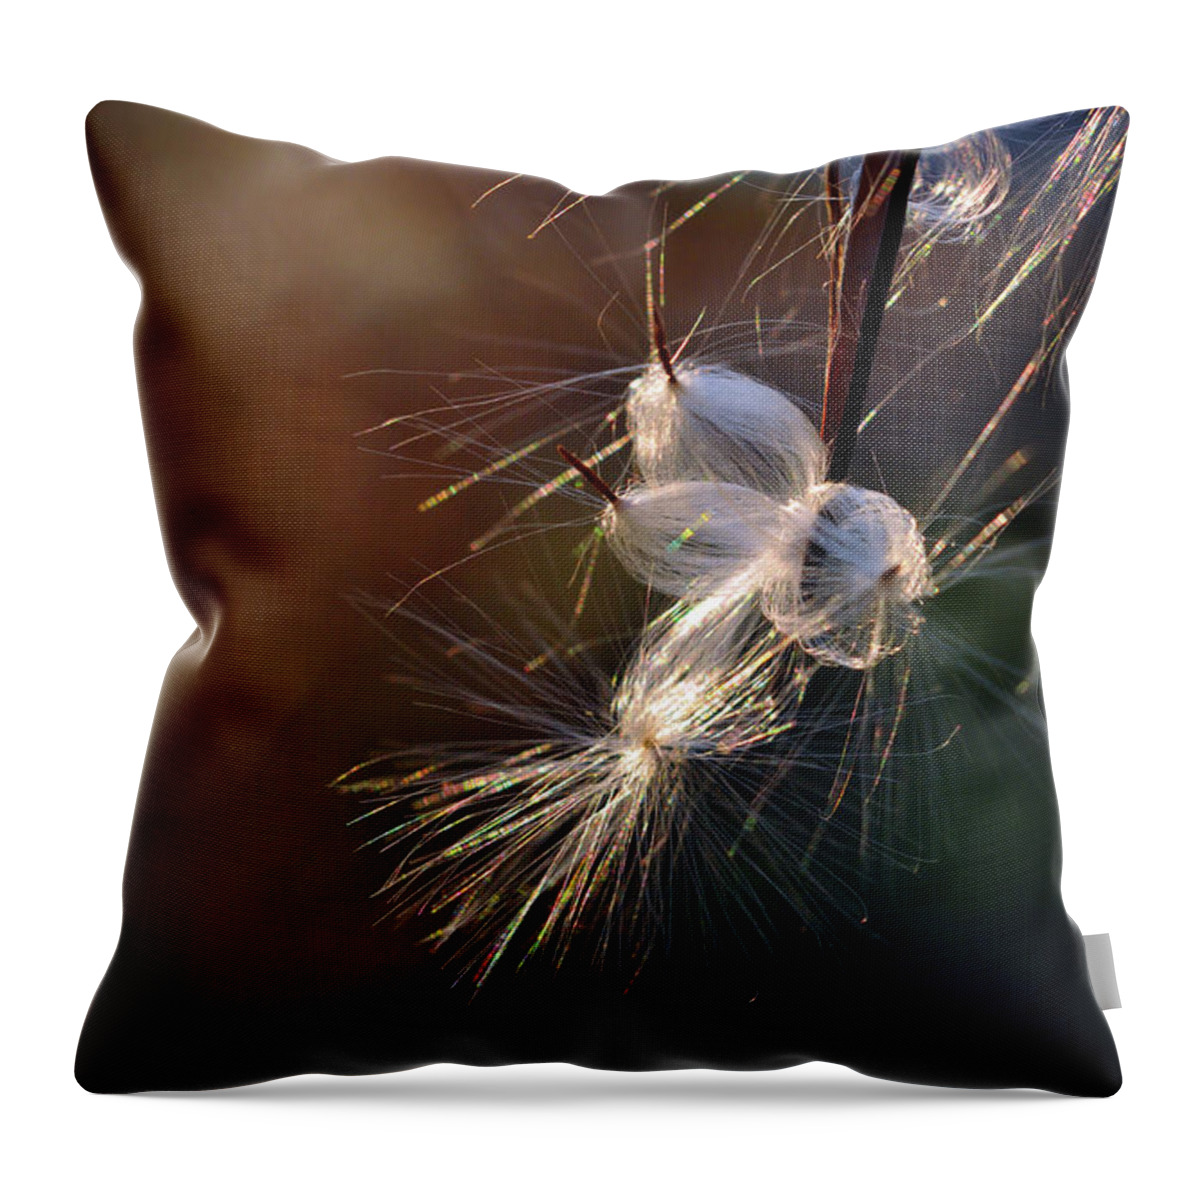 Milkweed Throw Pillow featuring the photograph Flight by Michelle Wermuth